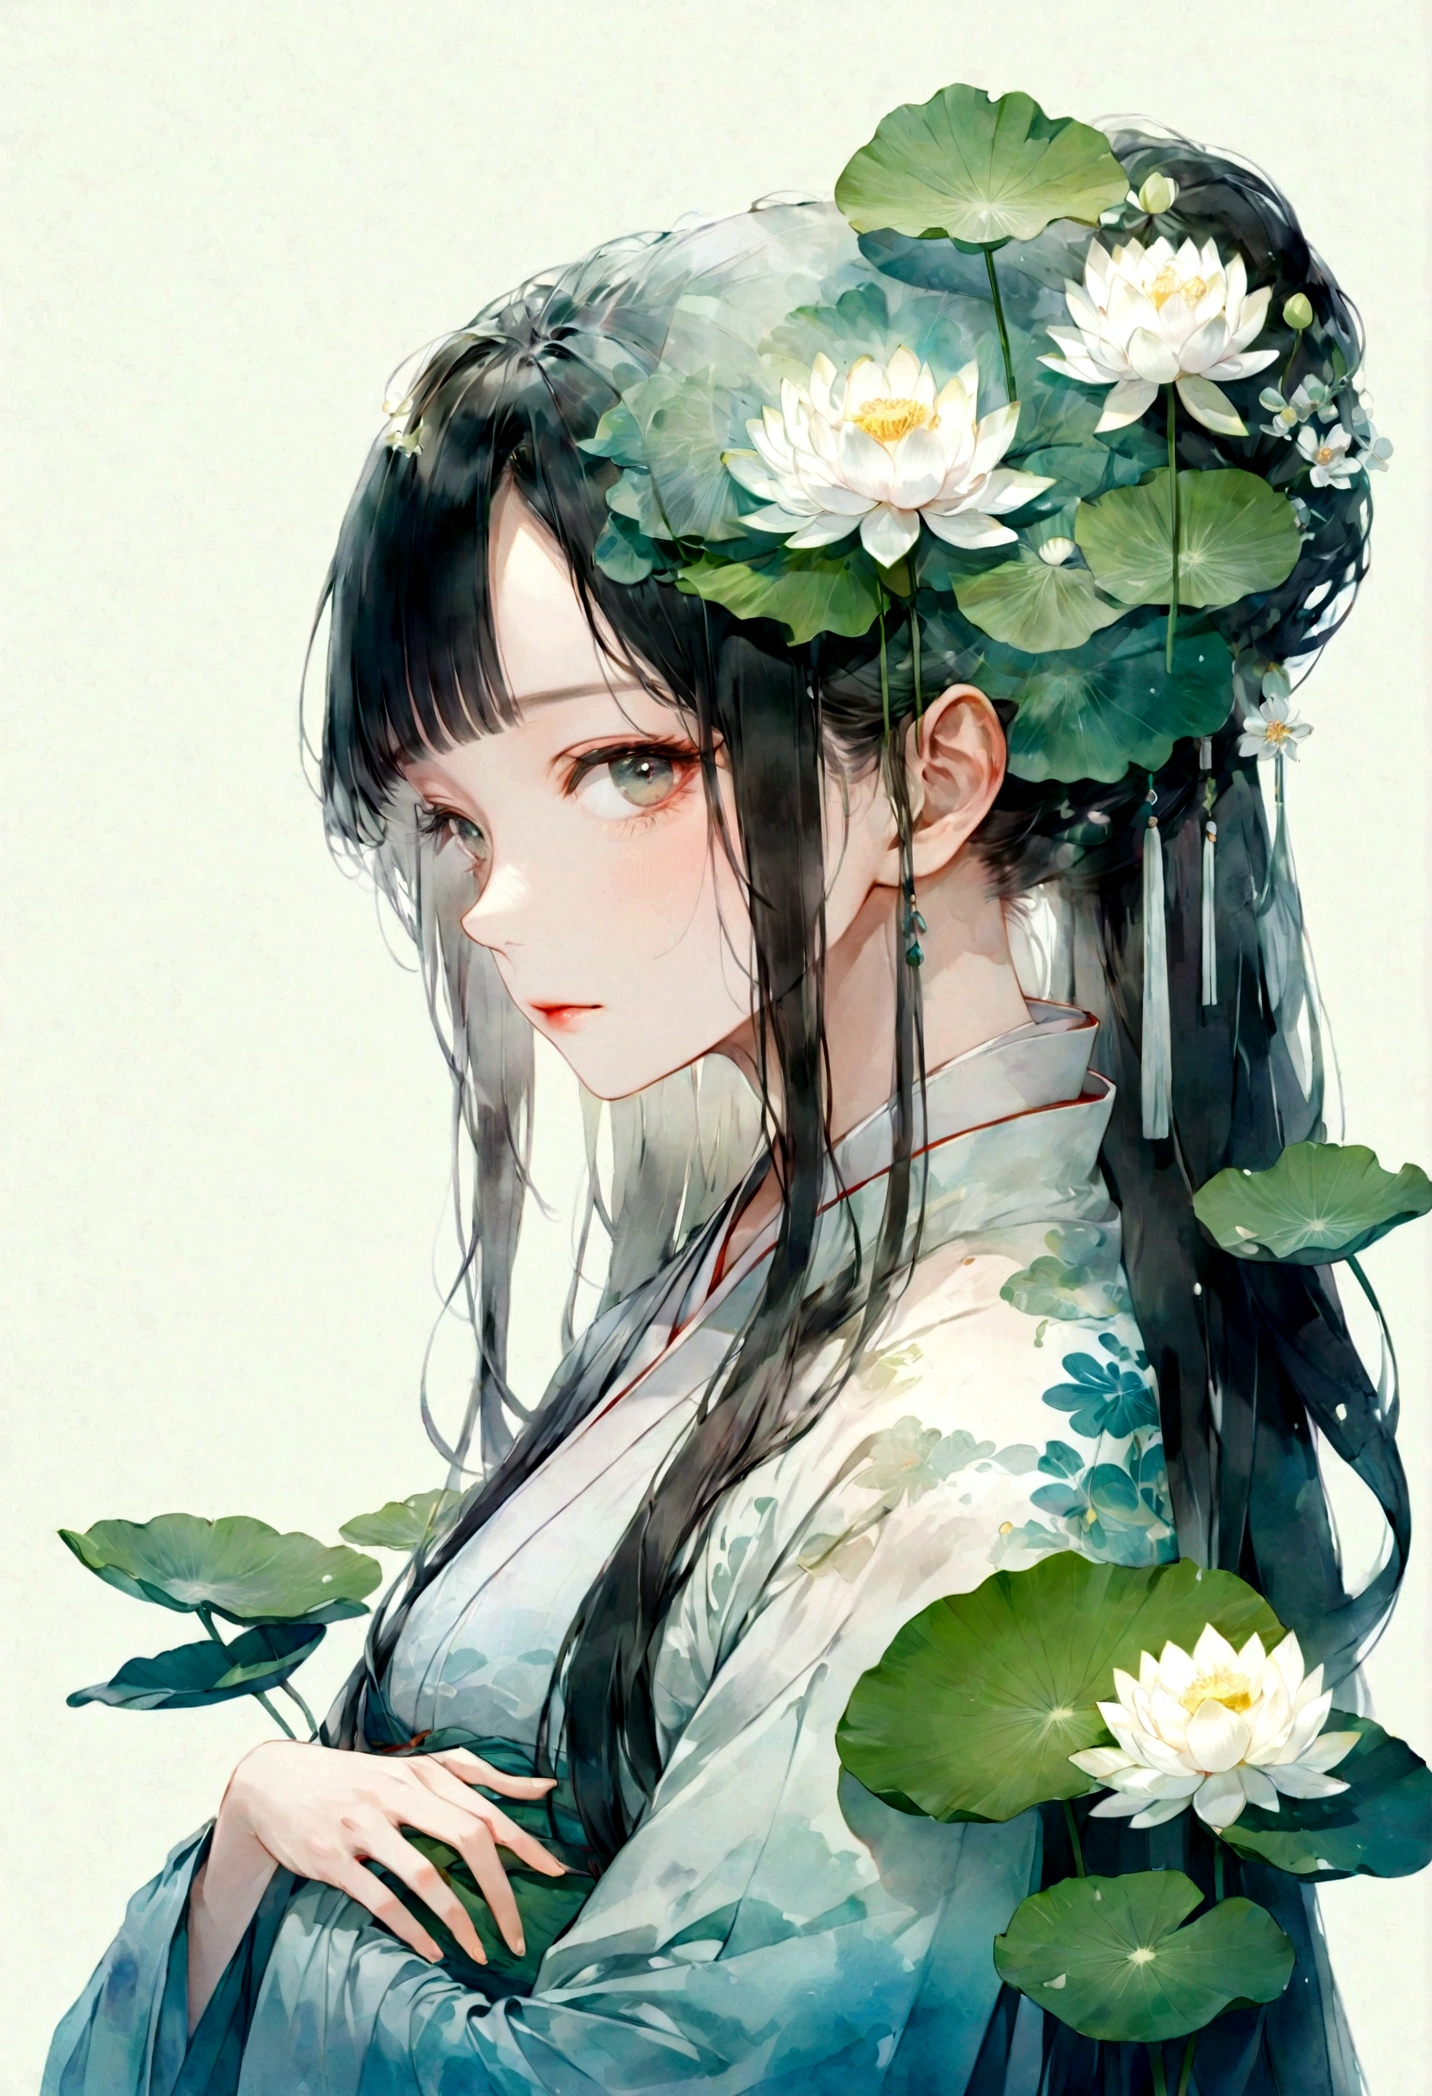    Double exposure flat vector of a beautiful and detailed girl with long hair wearing Chinese Hanfu(Face clear, beautiful and perfect)Image ( Perfect anatomical structure ) ，The background is semi-transparent and larger white lotus flowers and larger lotus leaves are perfect, Beautifully, Intricate illustrations,   Dreamy ethereal artwork conceptual artwork masterpiece, best quality, Super detailed, High quality meticulous watercolor style flat vector 

                          